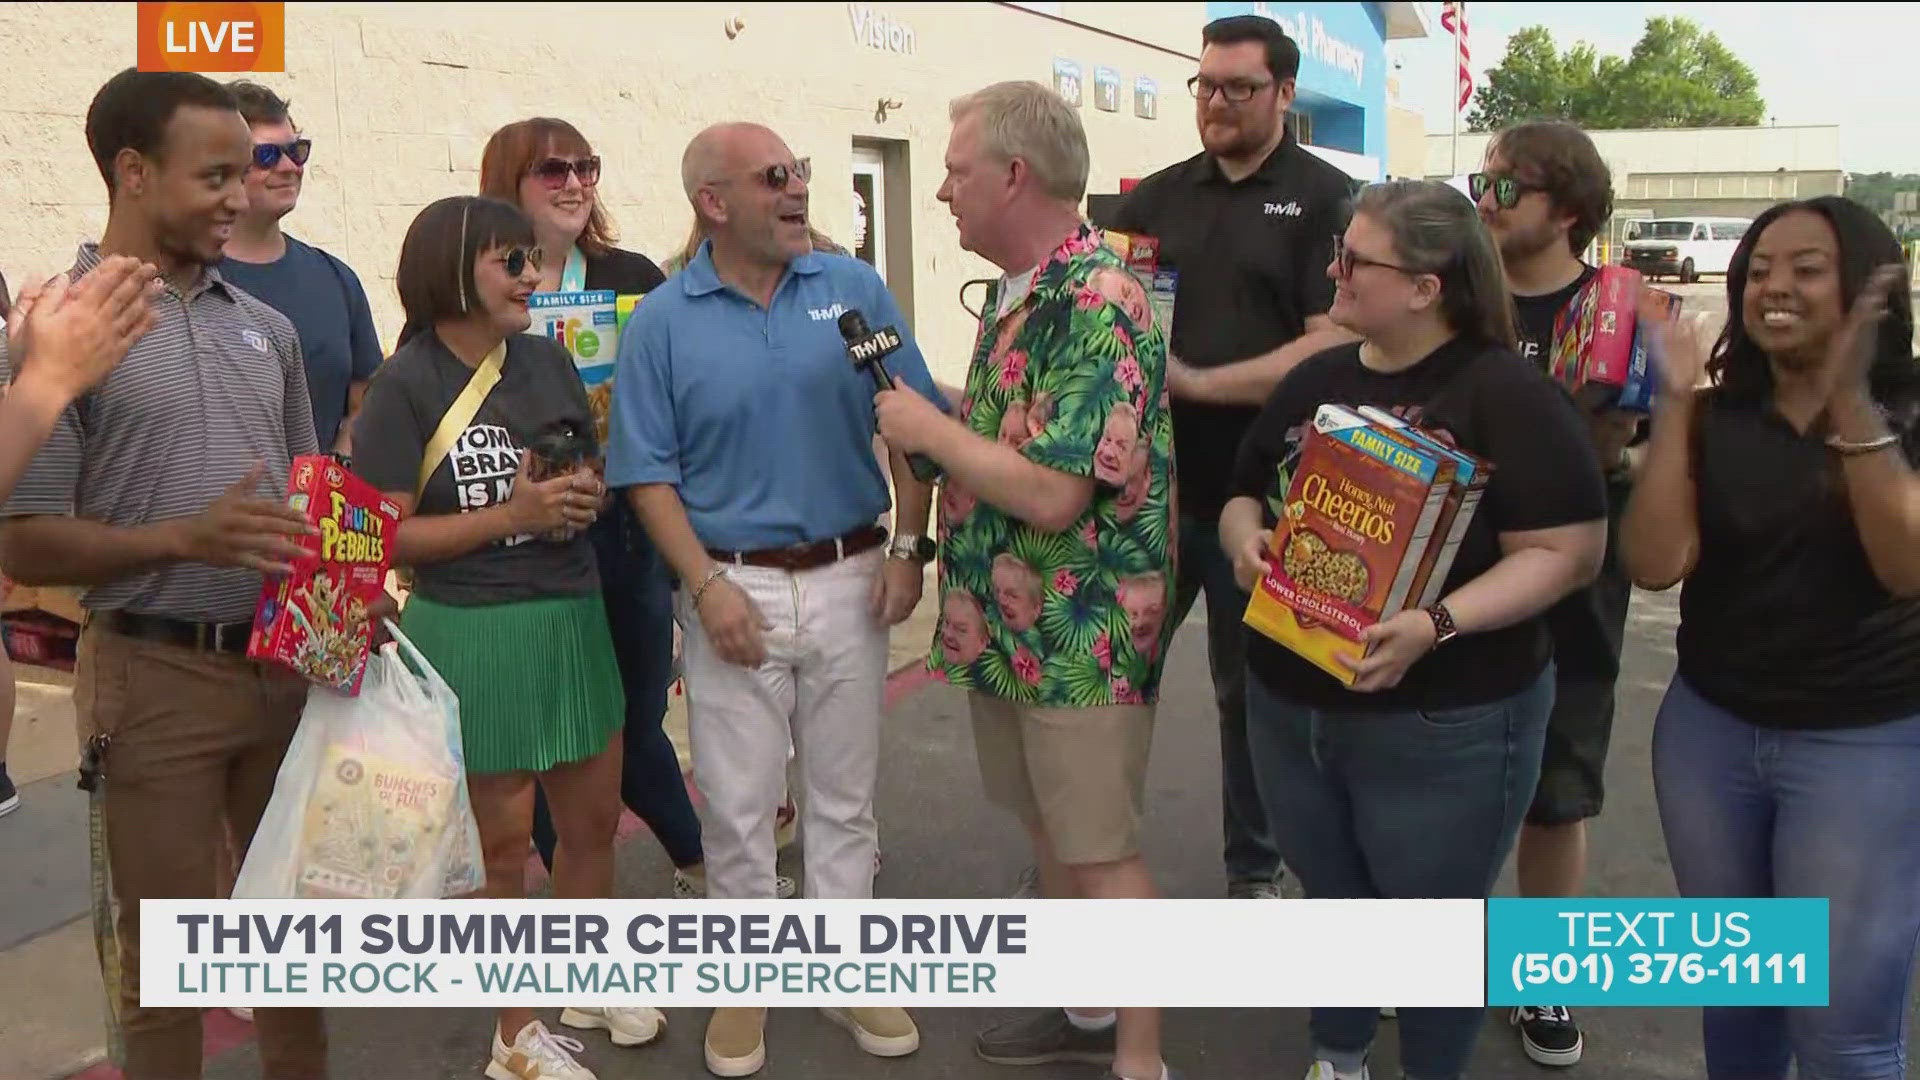 Chief meteorologist Tom Brannon meets with teams donating cereal to the THV11 Summer Cereal Drive in Little Rock.